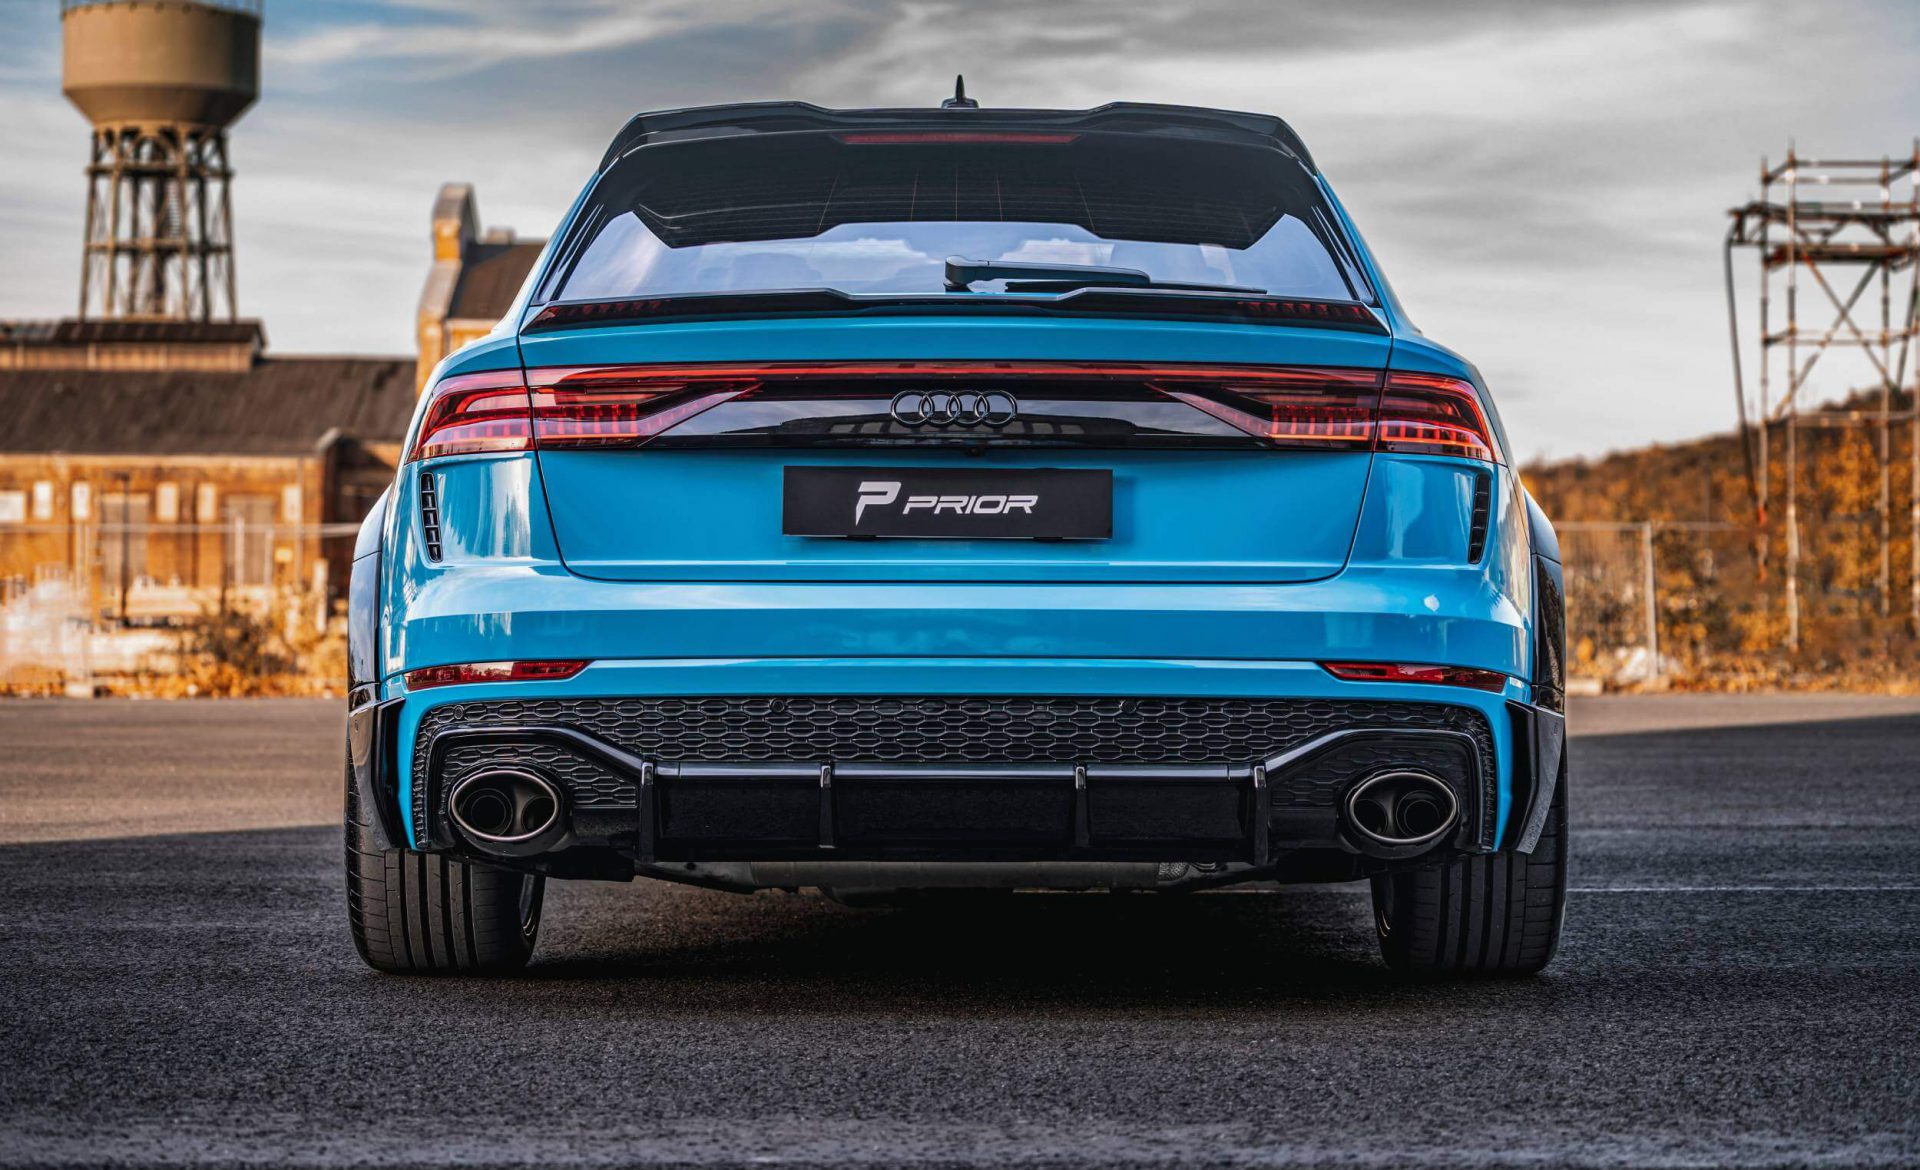 PD-RS800 Diffusor for Audi RS Q8